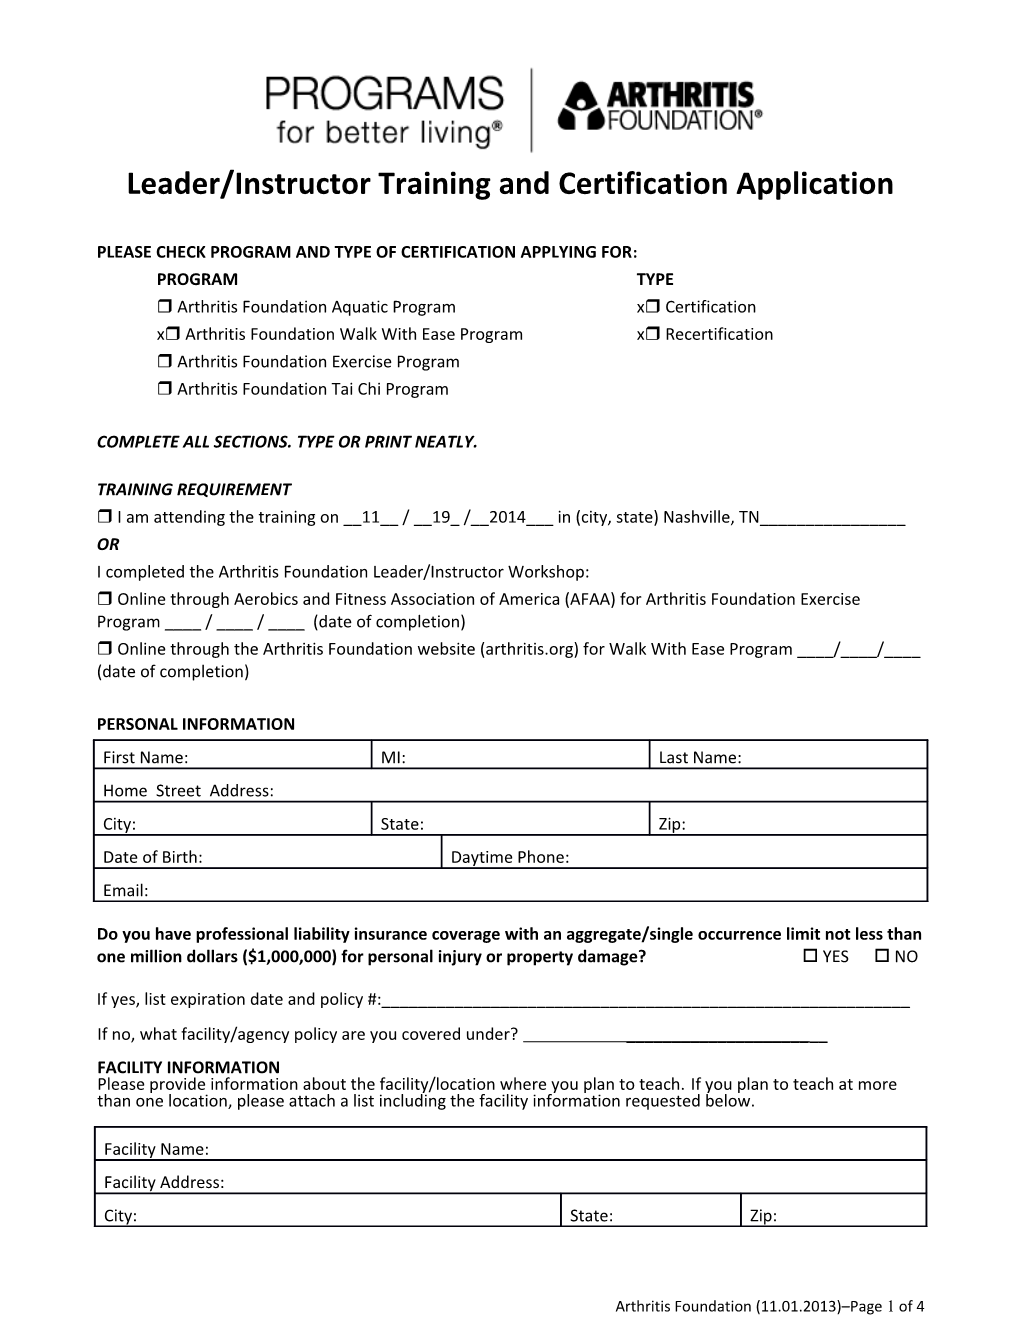 Leader/Instructor Training and Certification Application